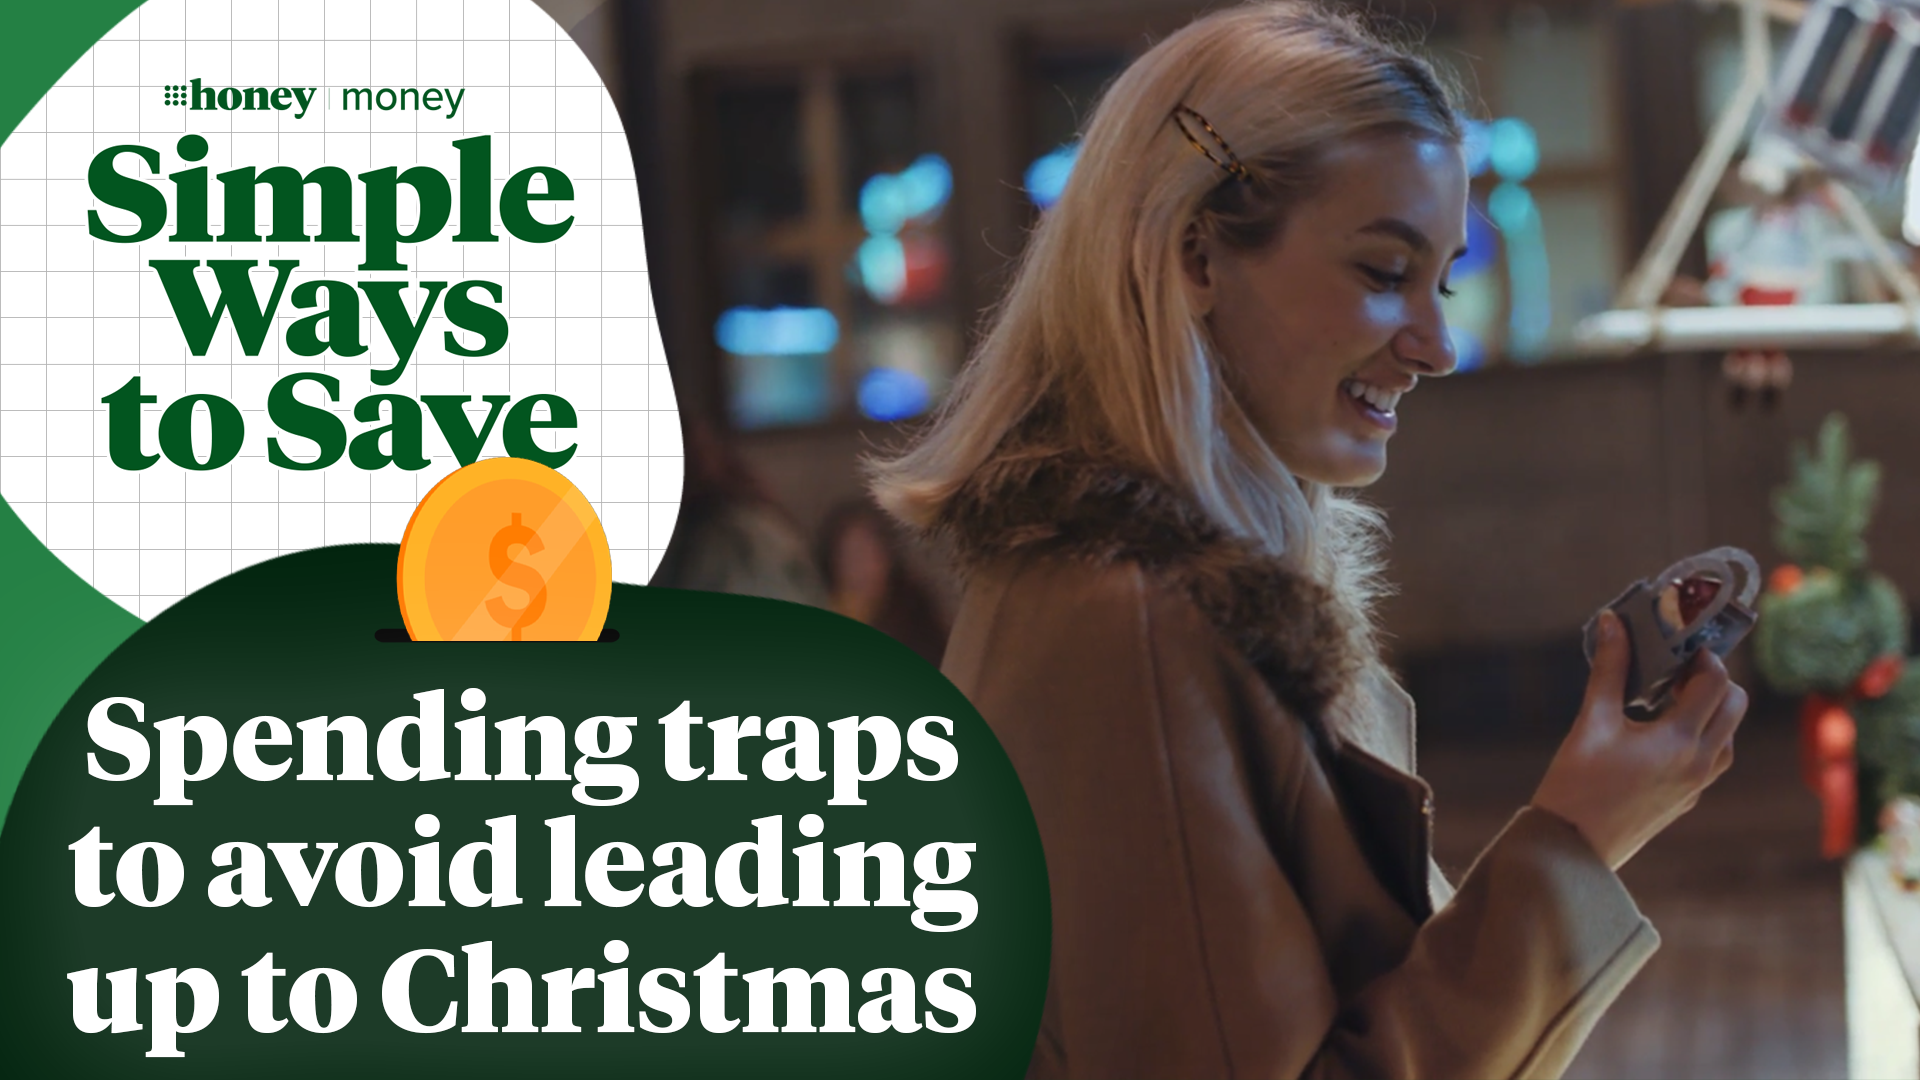  Simple Ways to Save: Spending traps to avoid this Christmas